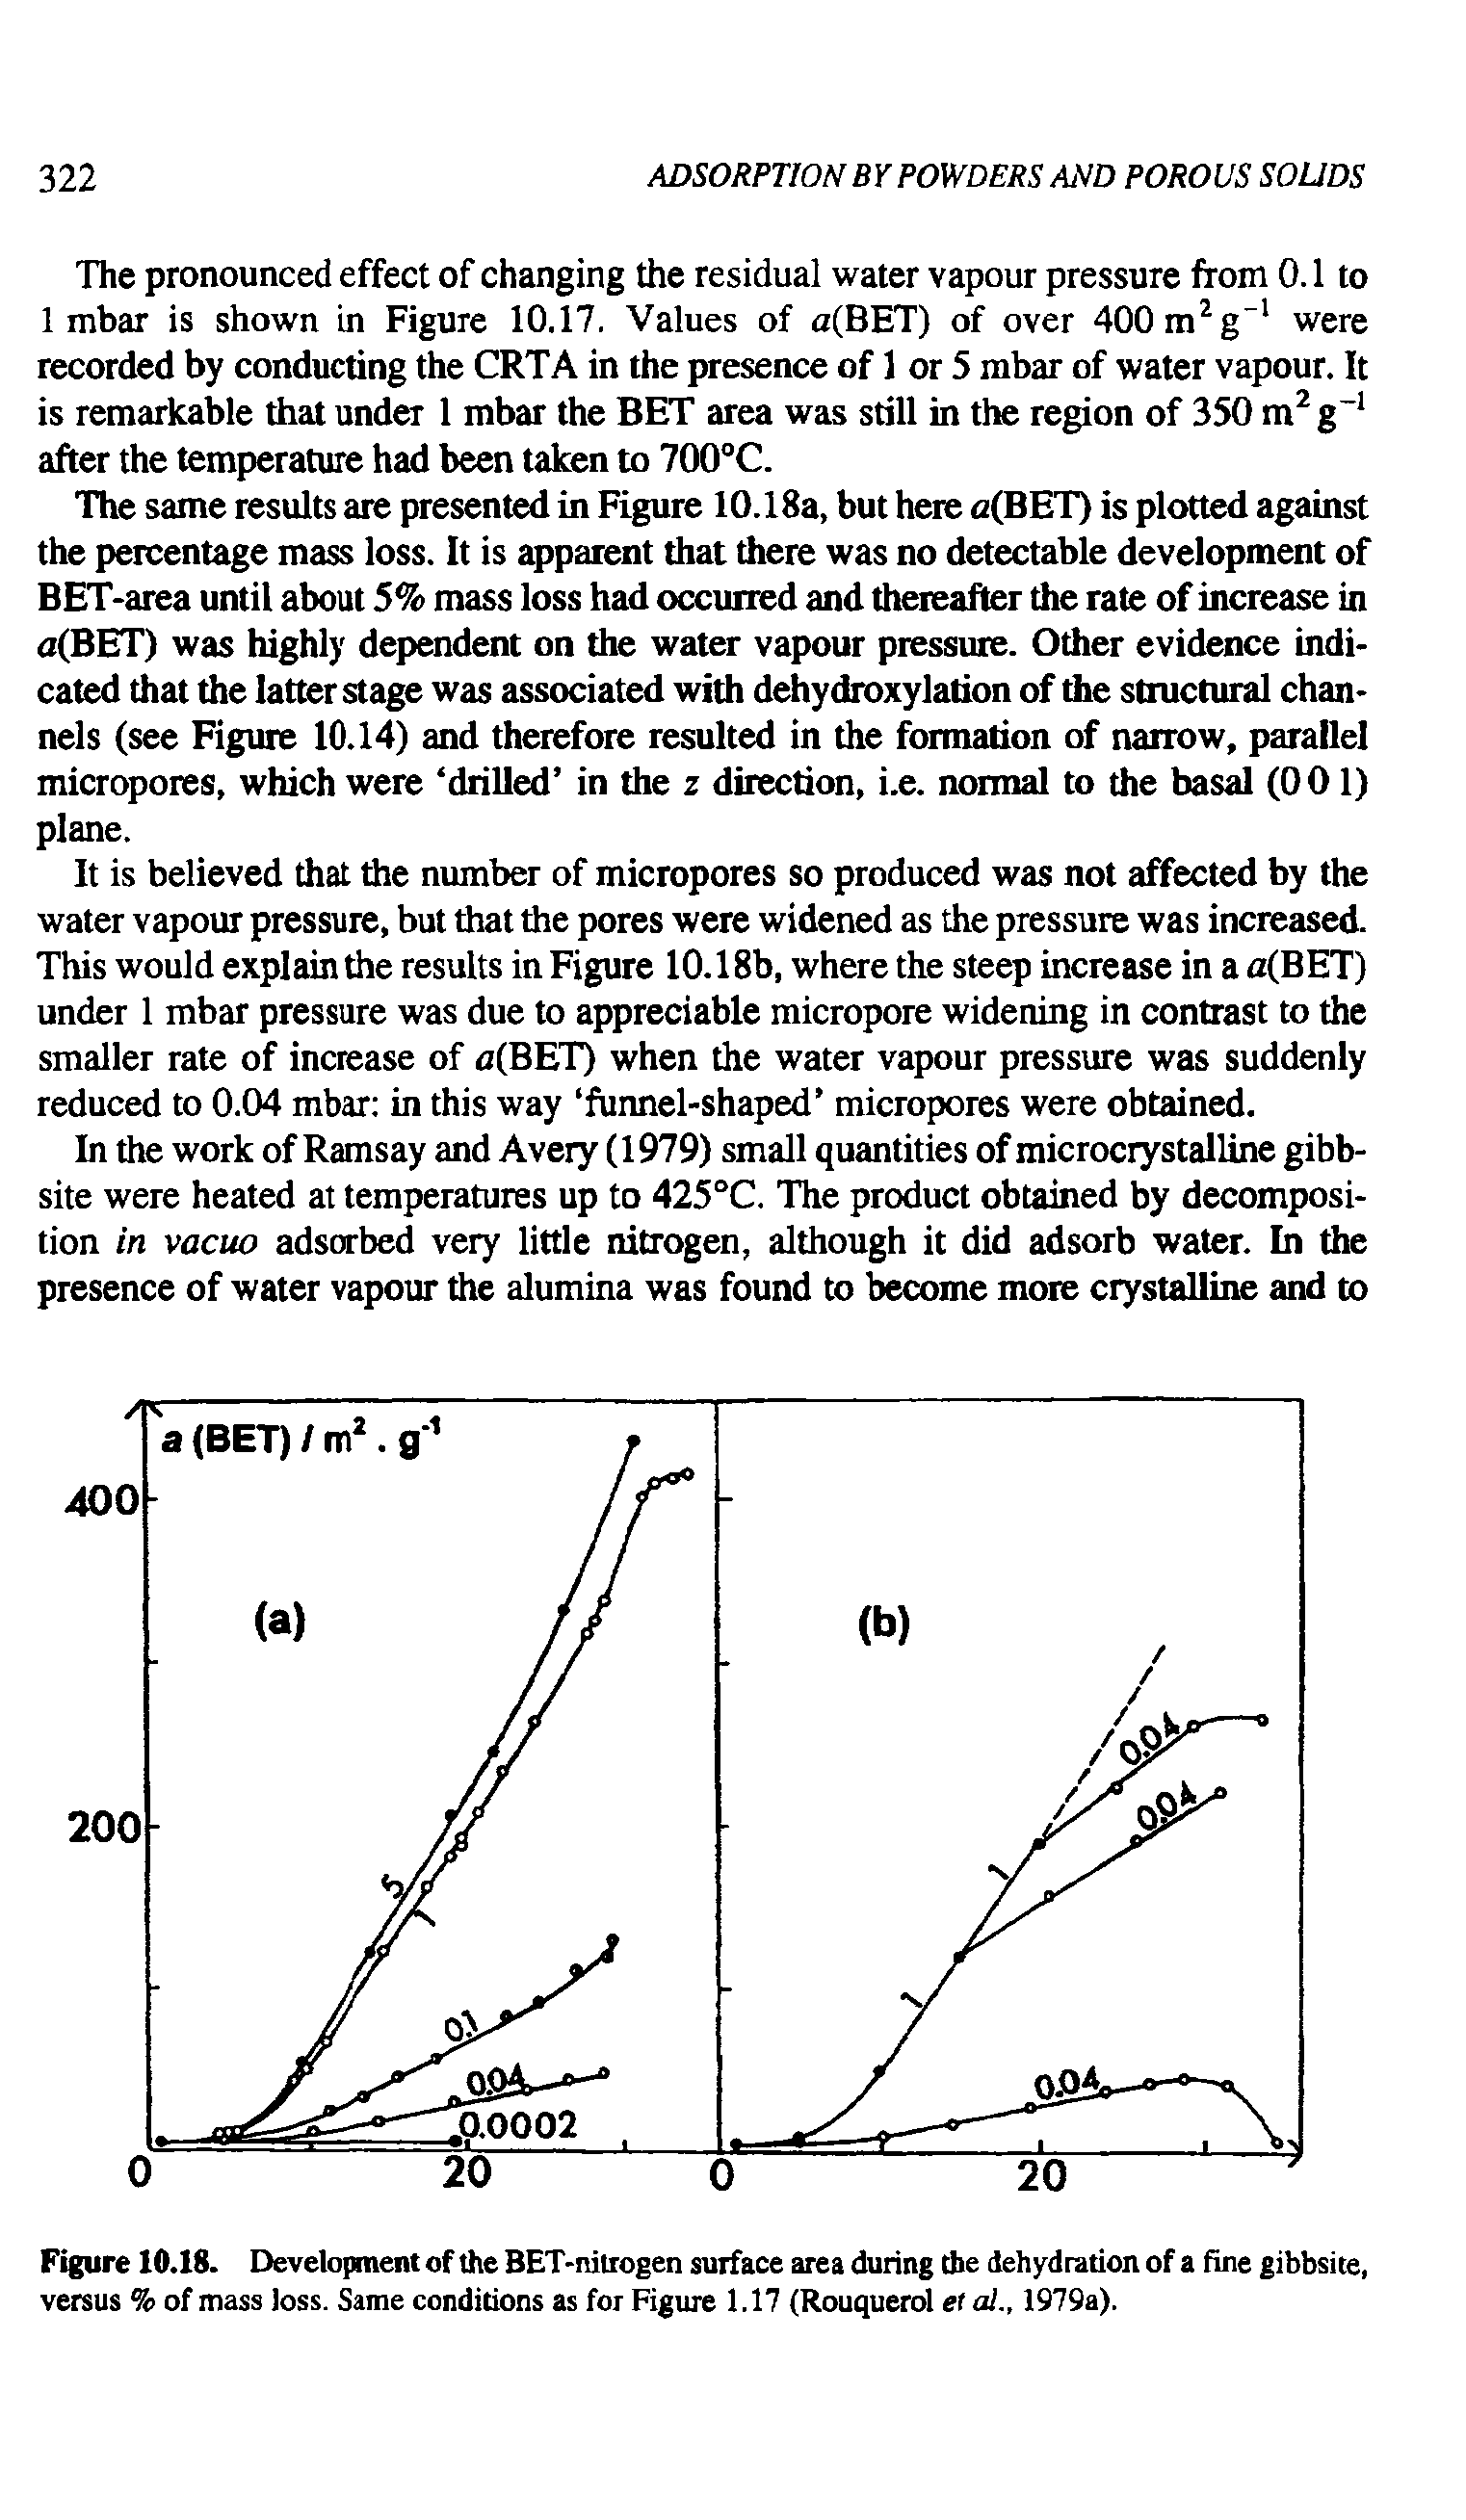 Figure 10.18. Development of the BET-nitrogen surface area during the dehydration of a fine gibbsite, versus % of mass loss. Same conditions as for Figure 1.17 (Rouquerol et al., 1979a).